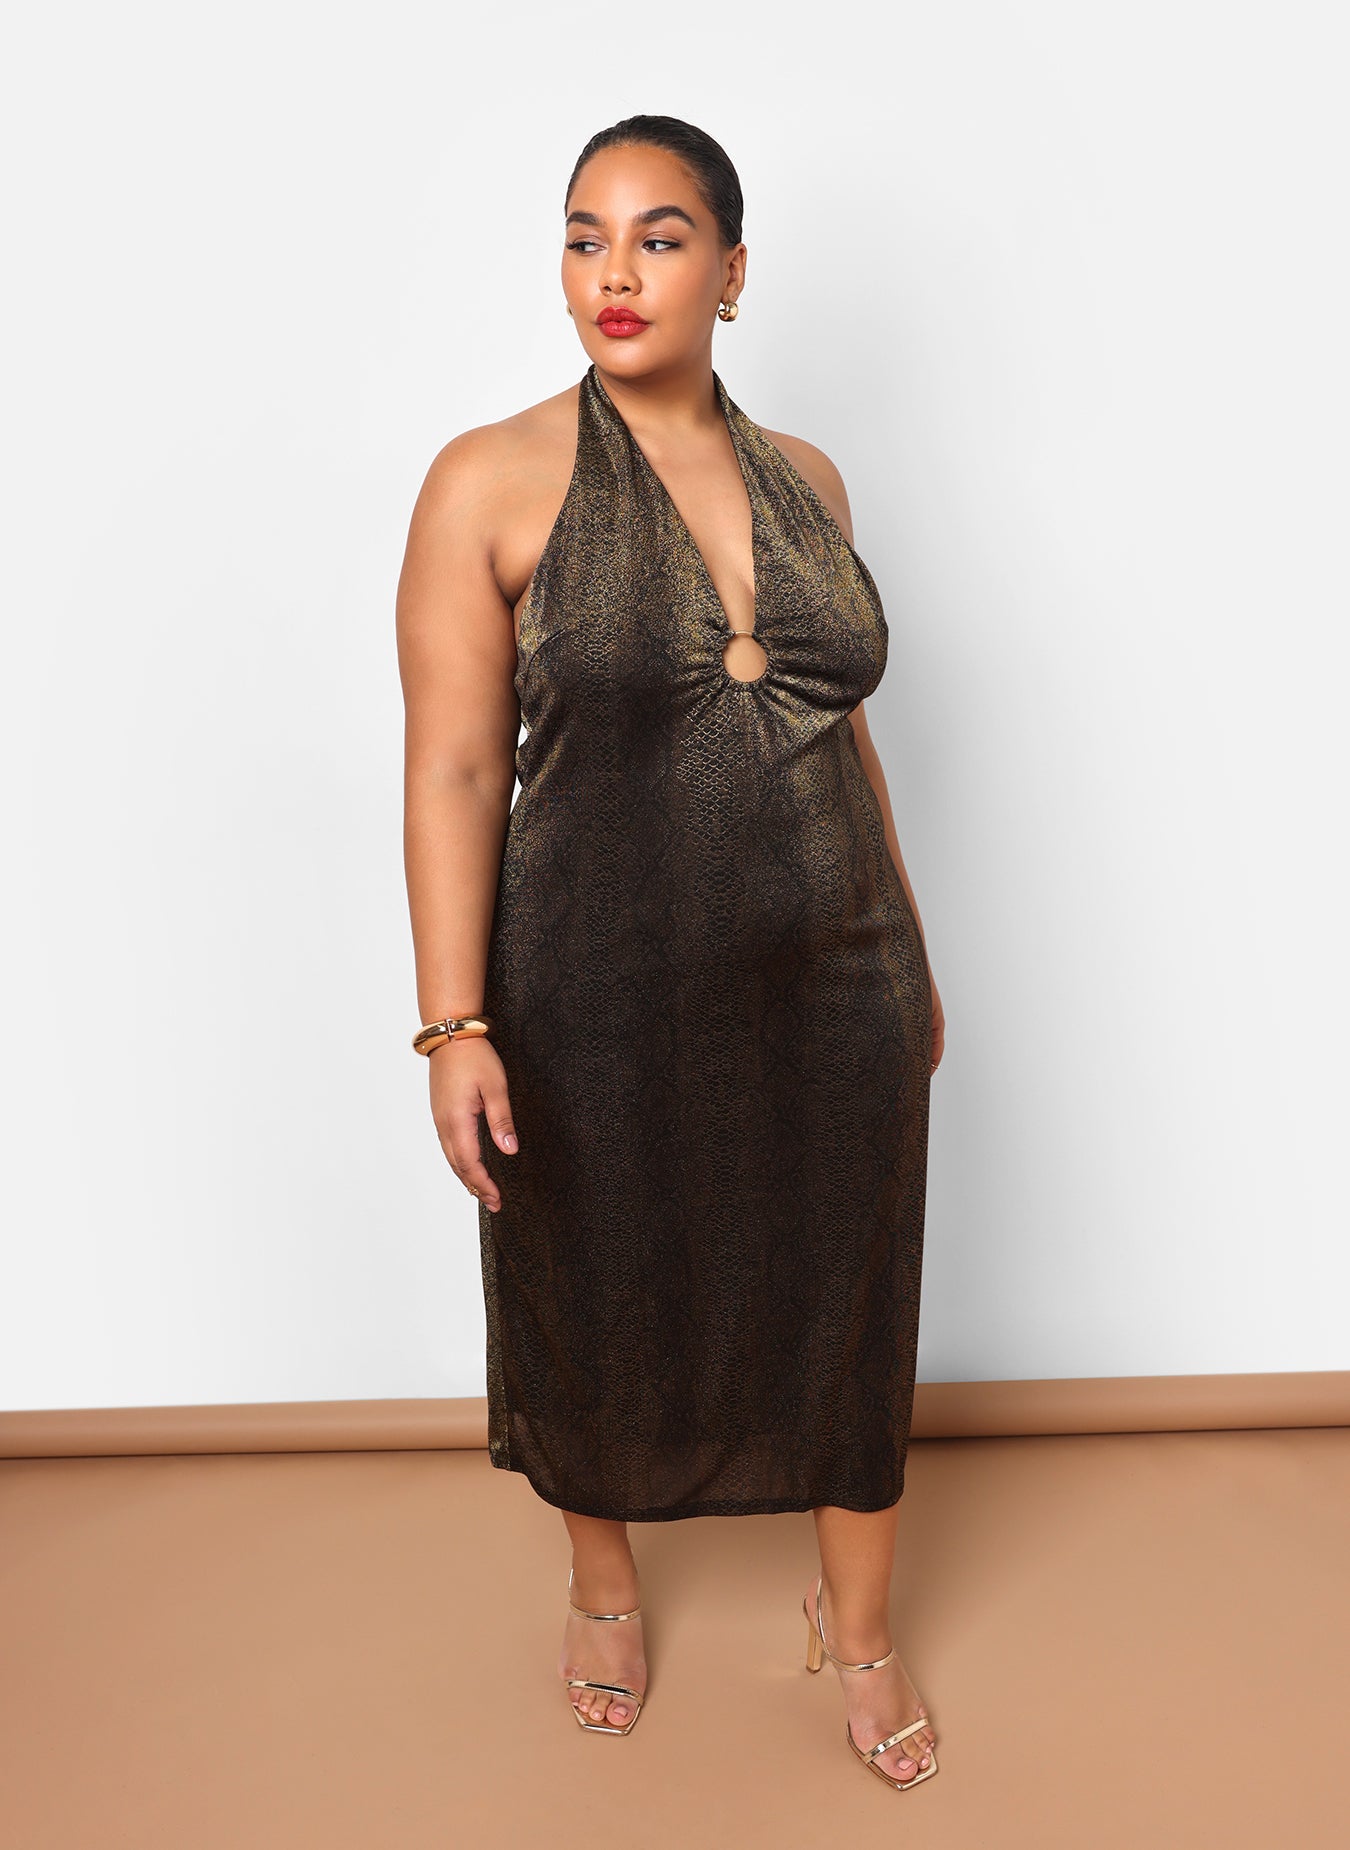 Shop Double Slit Dress For Women Plus Size with great discounts